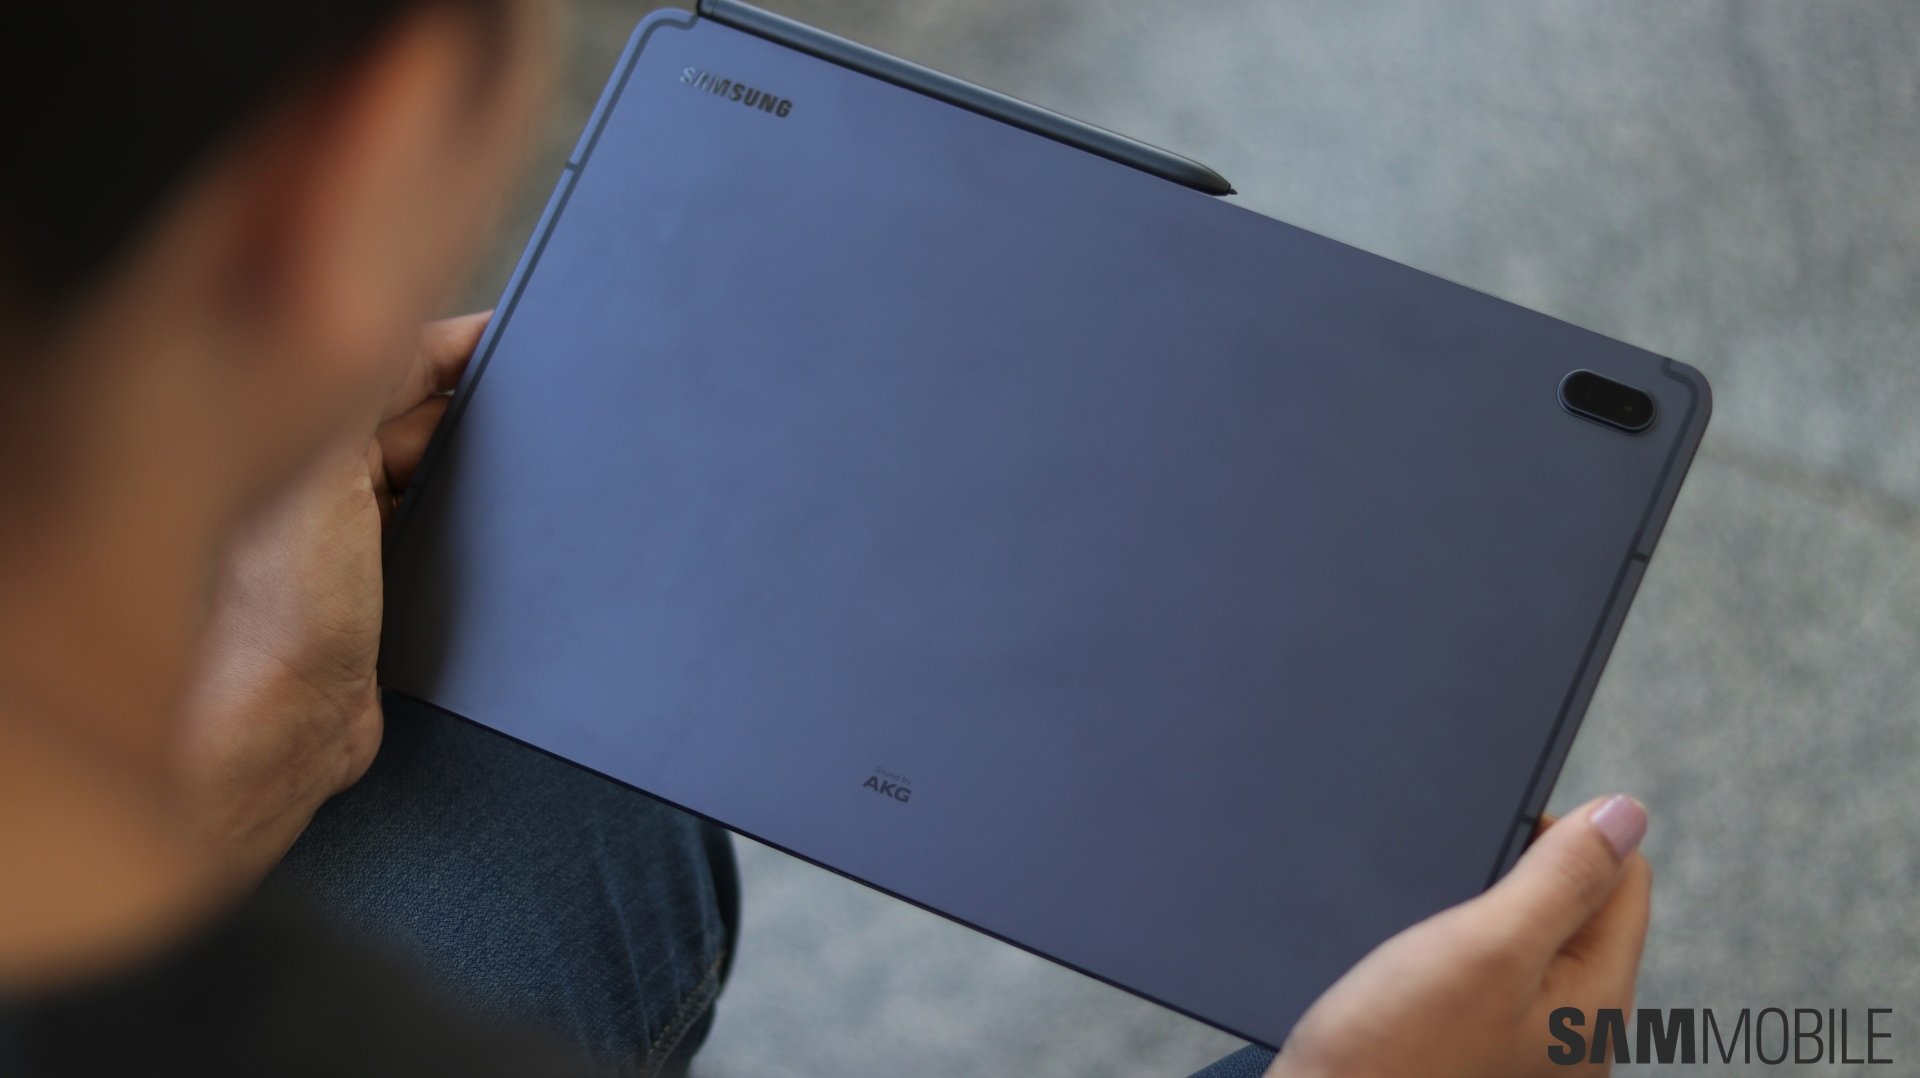 Samsung Galaxy Tab S7 FE review: Good tablet, but no 'fan SamMobile